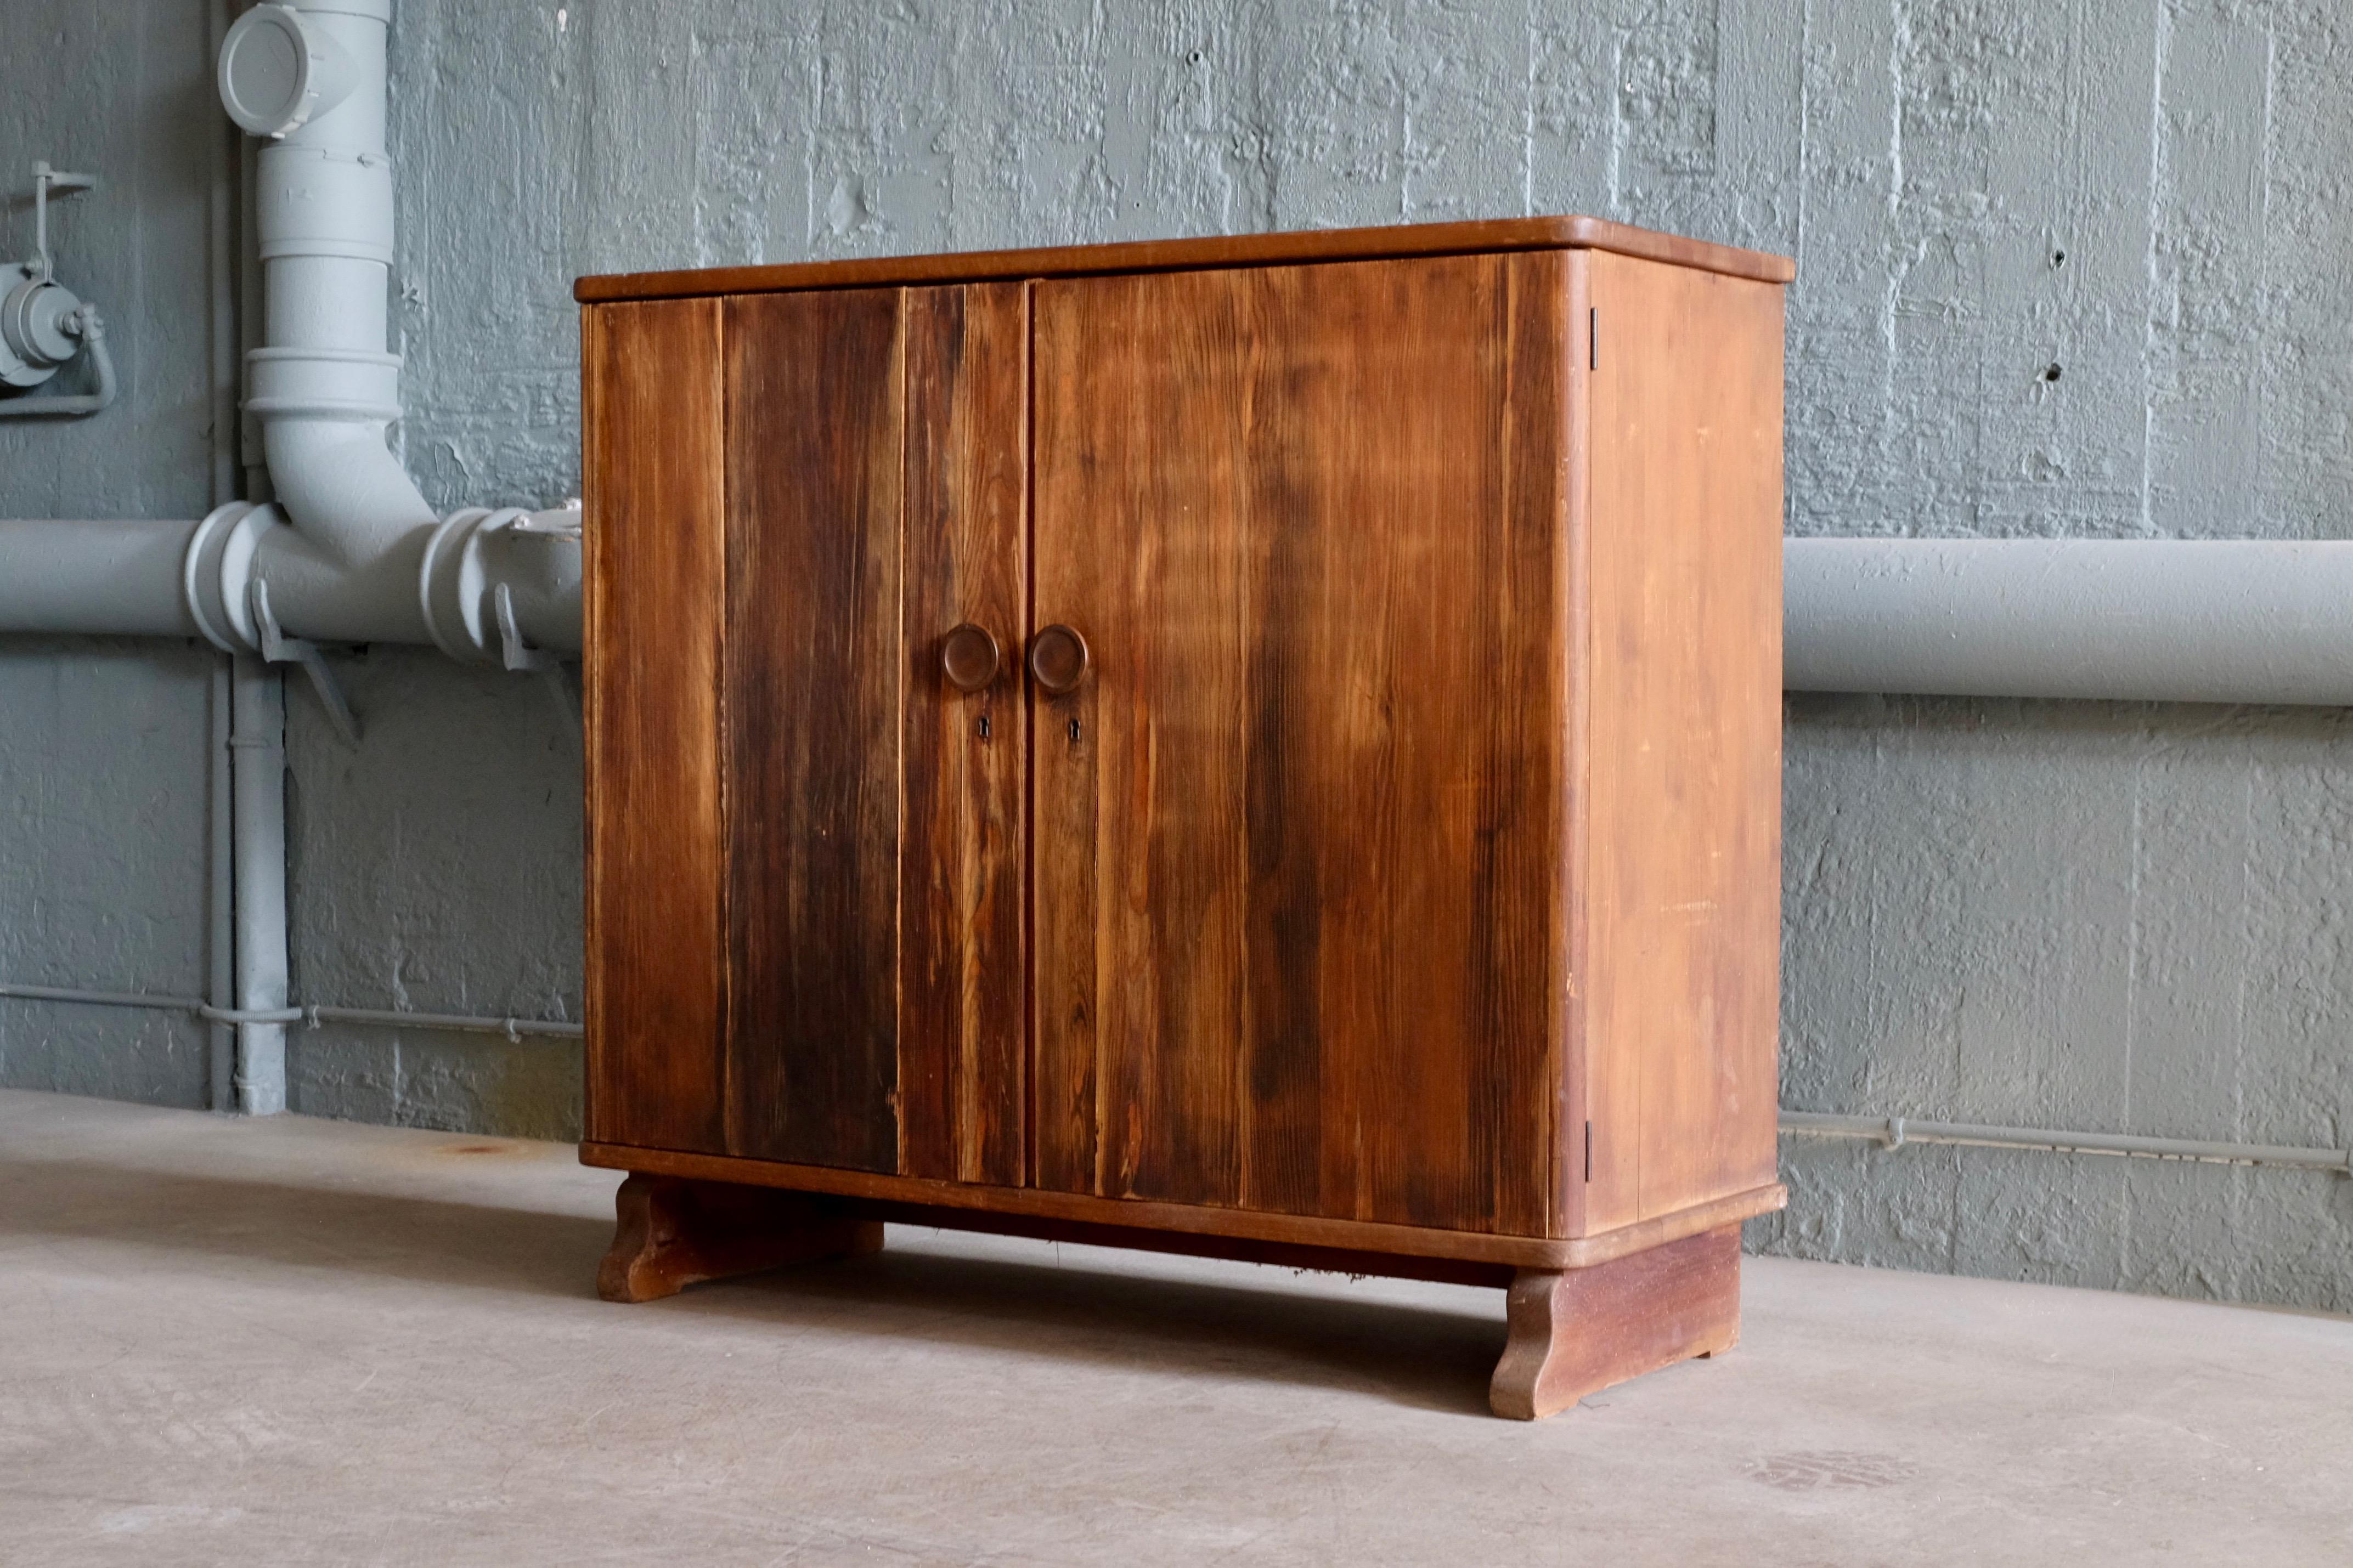 Rare Swedish dark stained pine cabinet with wonderful patina. Designer unknown. Produced in Sweden, late 1930s. Locker with key in working condition.